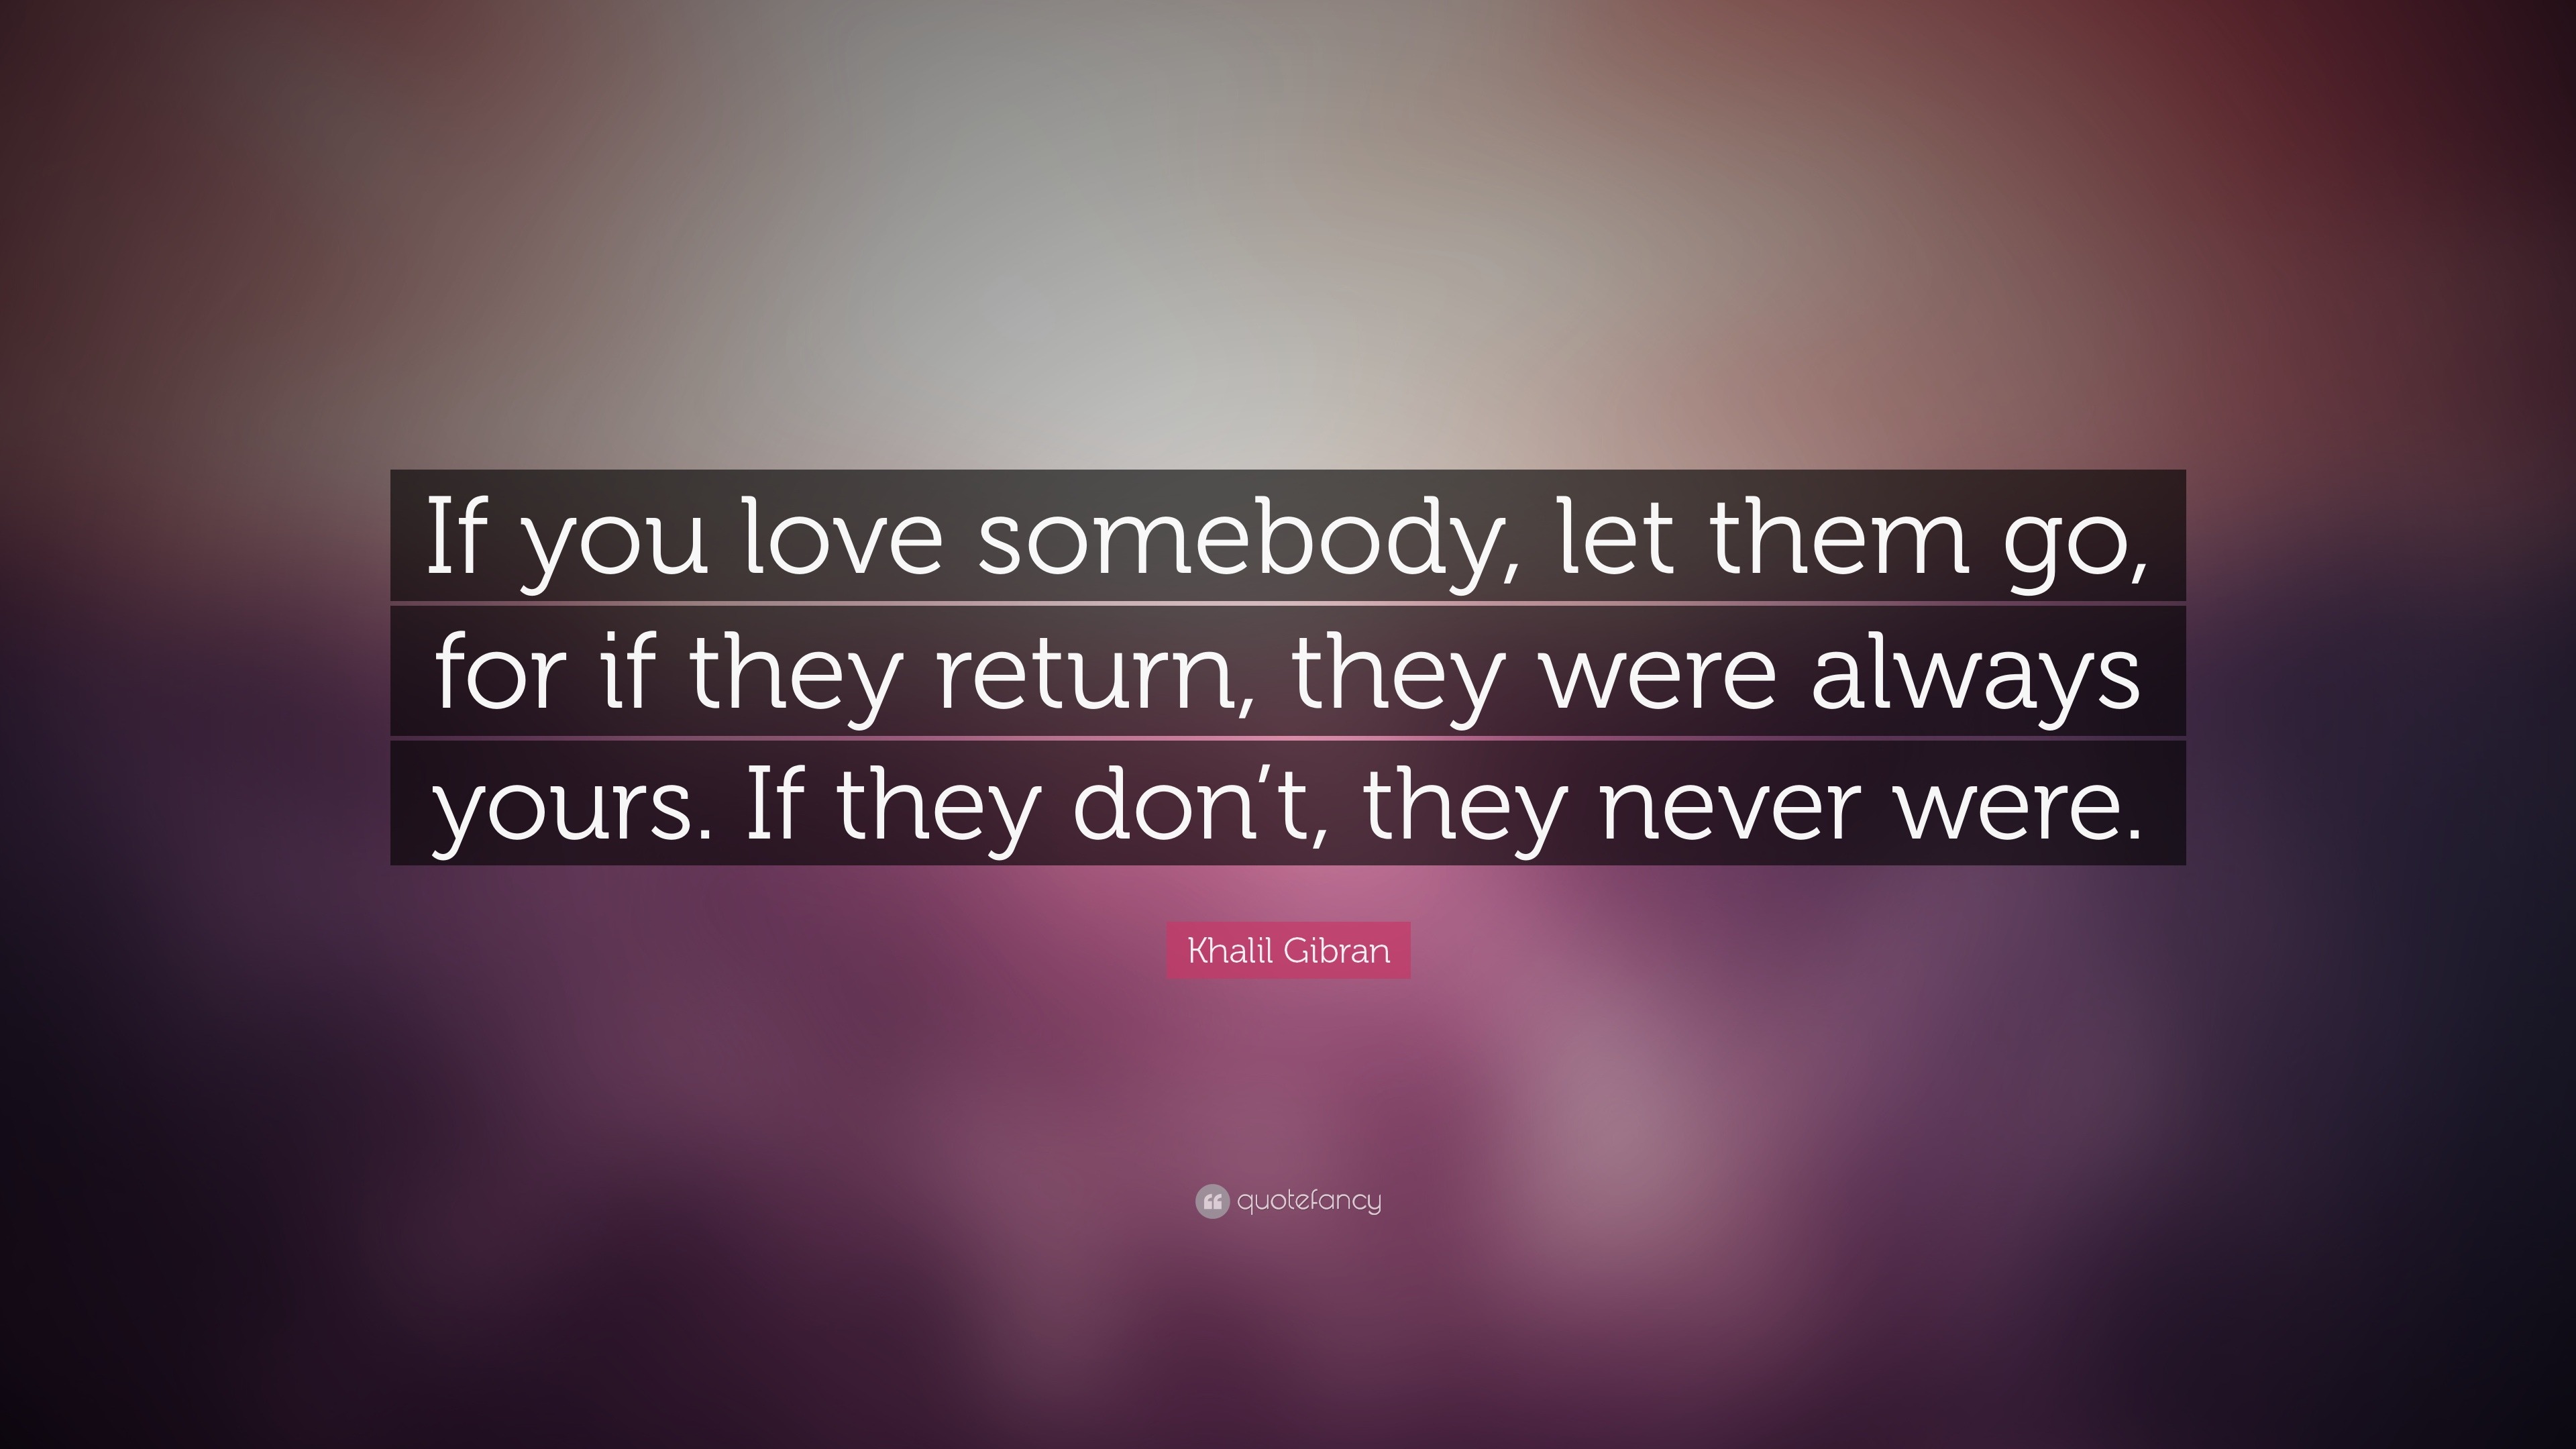 Khalil Gibran Quote “If you love somebody let them go for if